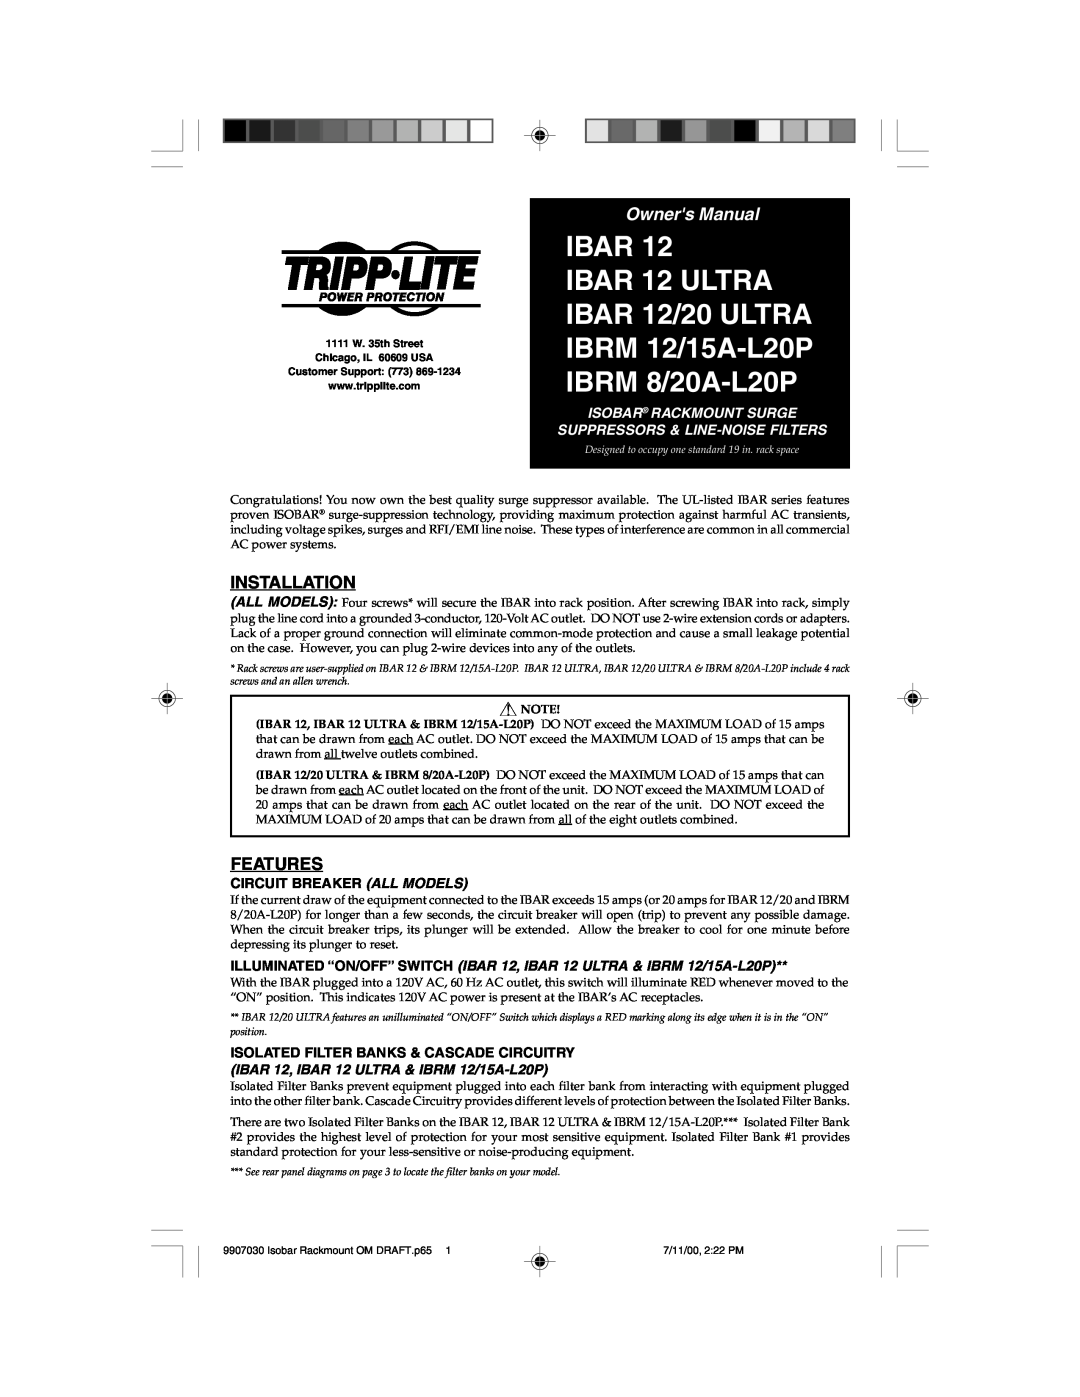 Tripp Lite IBAR12/20 ULTRA owner manual ILLUMINATED “ON/OFF” SWITCH IBAR 12, IBAR 12 ULTRA & IBRM 12/15A-L20P, Features 